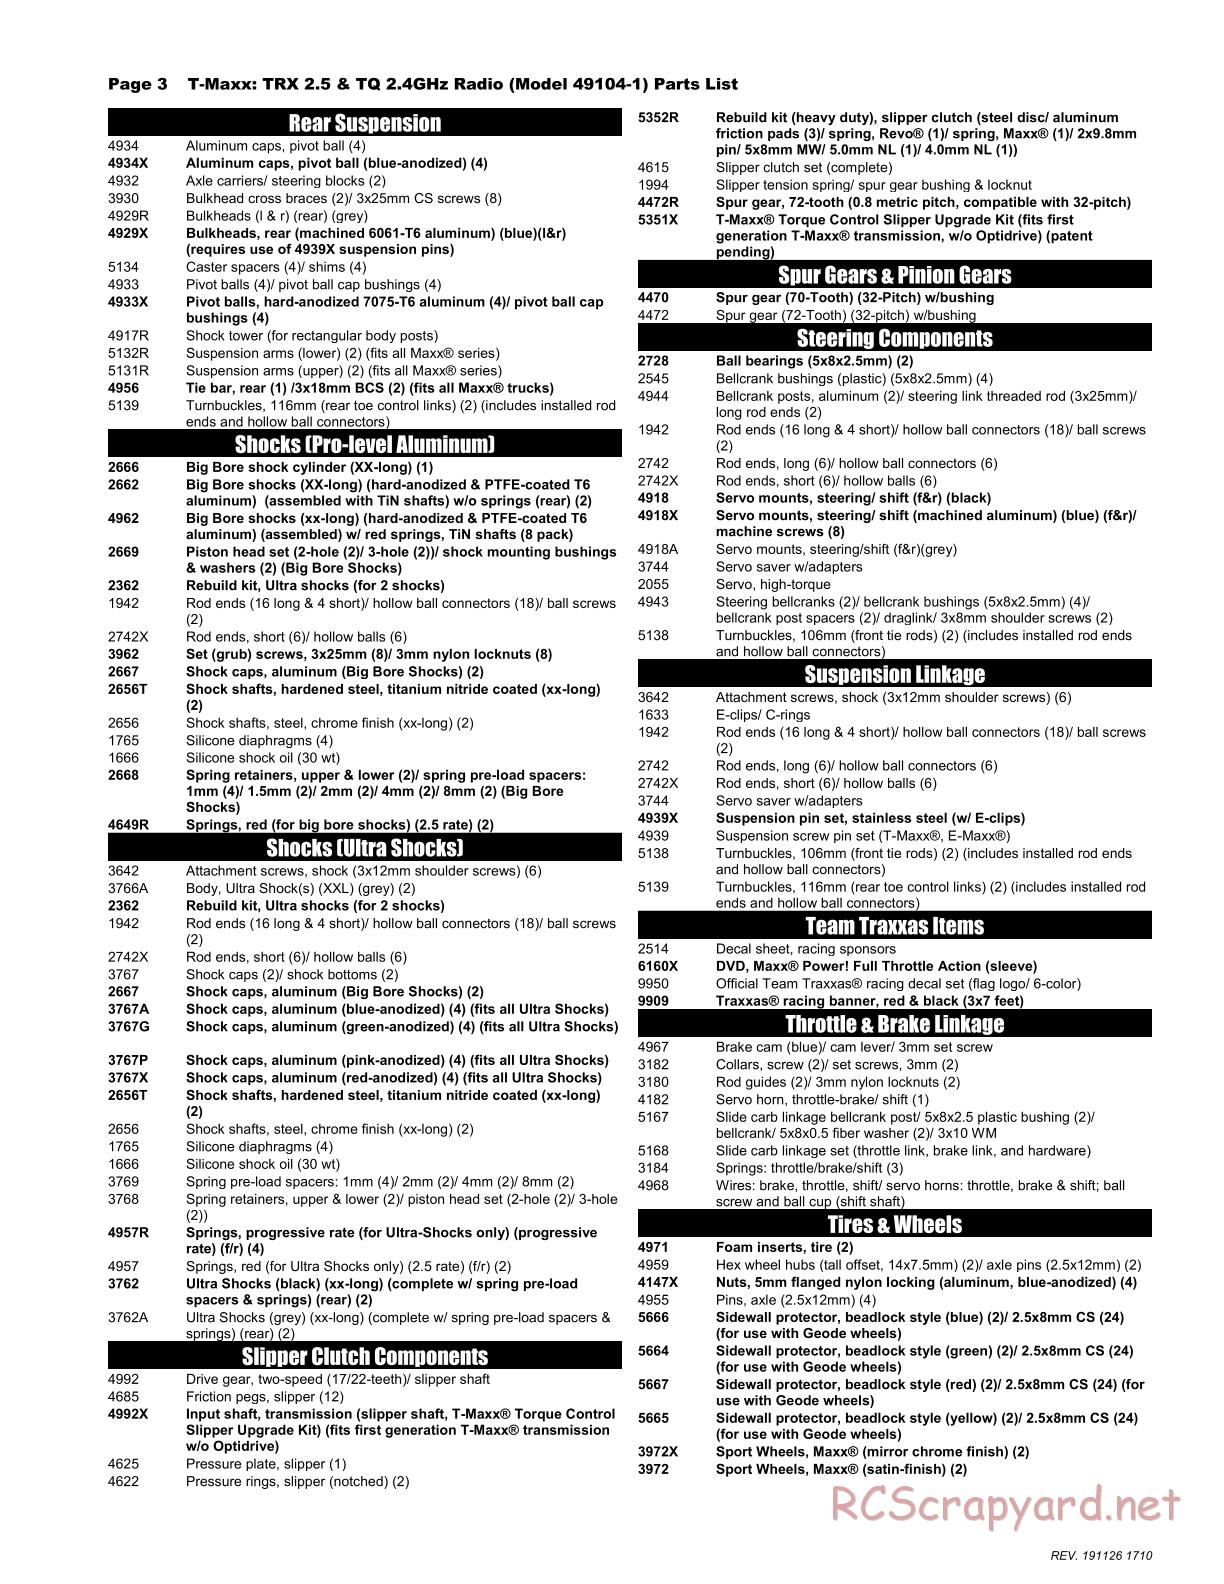 Traxxas - T-Maxx Classic - Parts List - Page 3